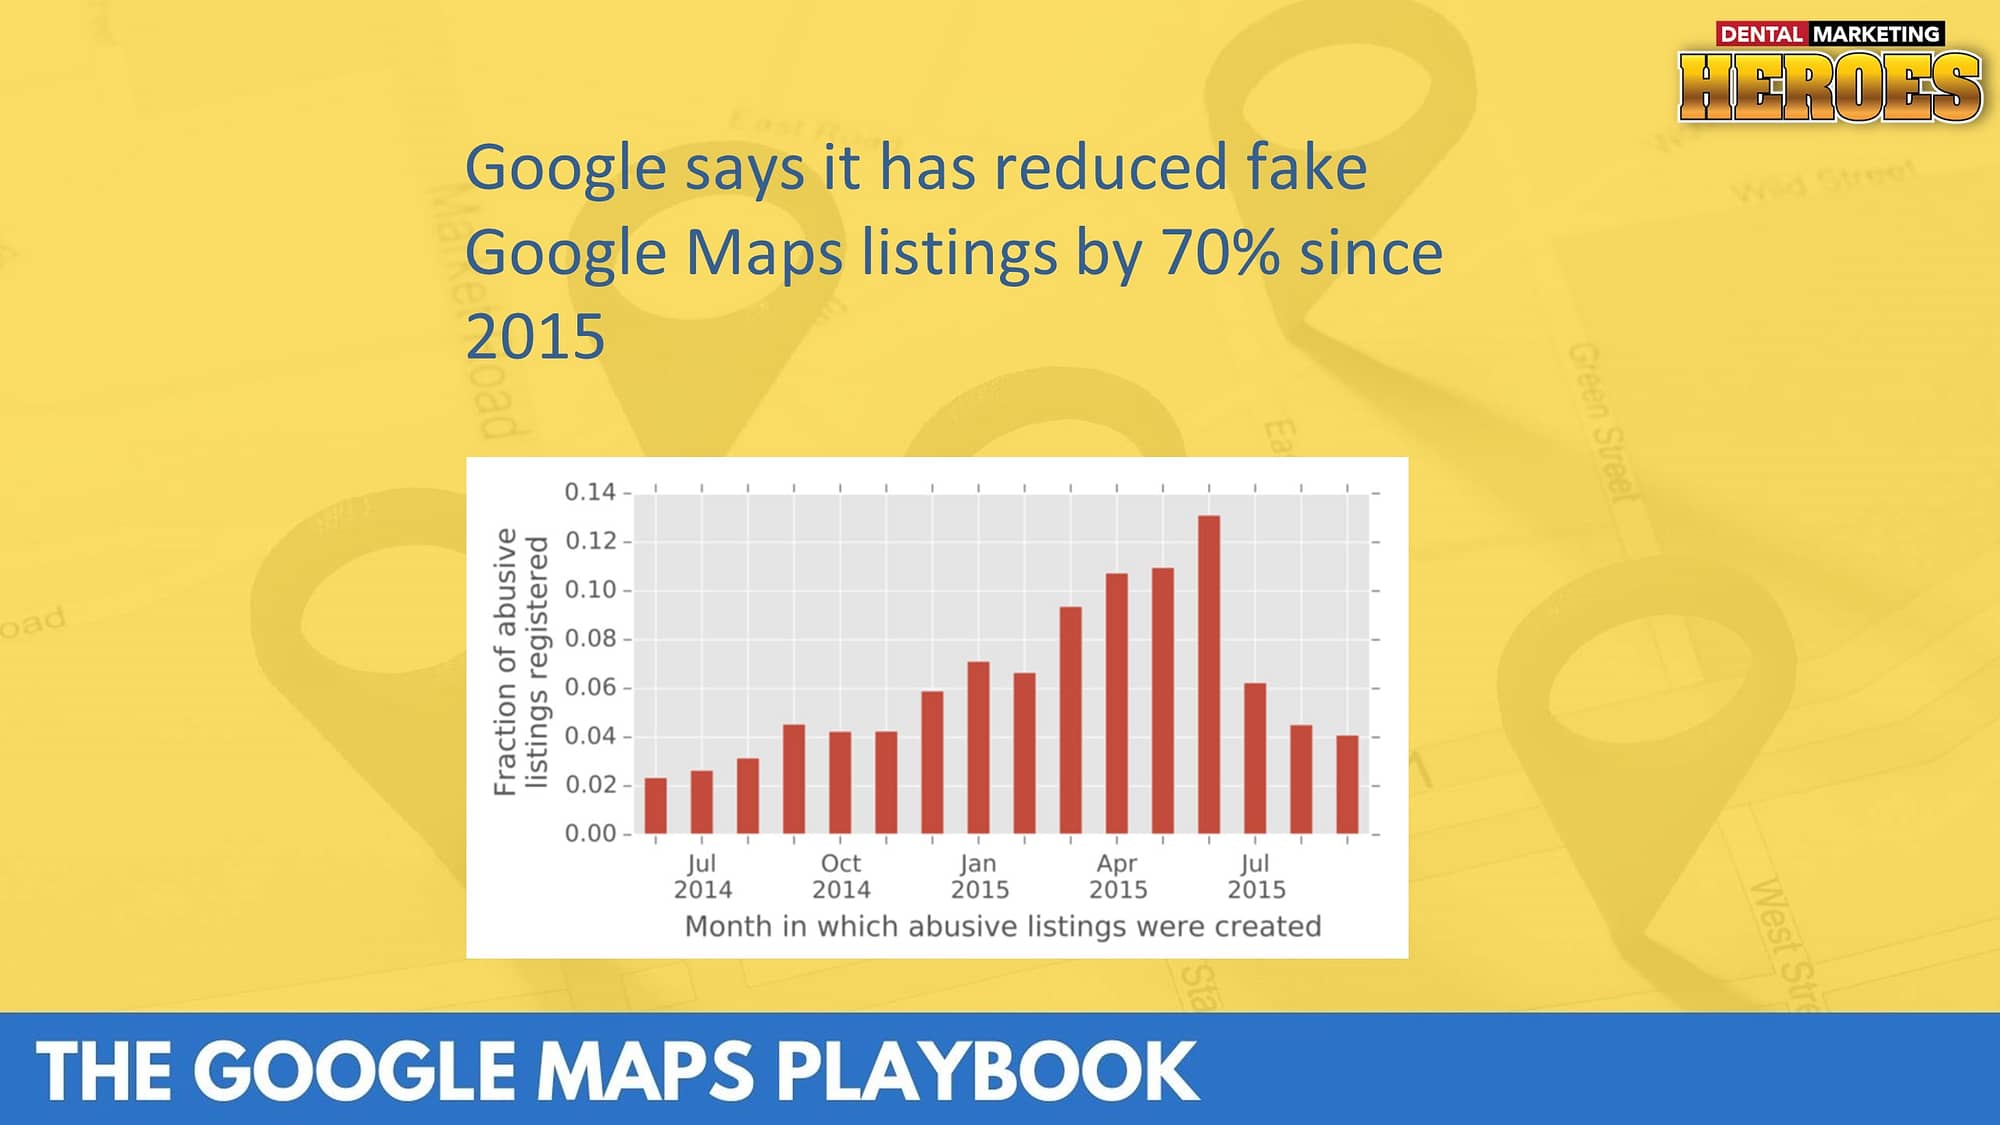 Google has reduced fake Google Maps listings by 70%